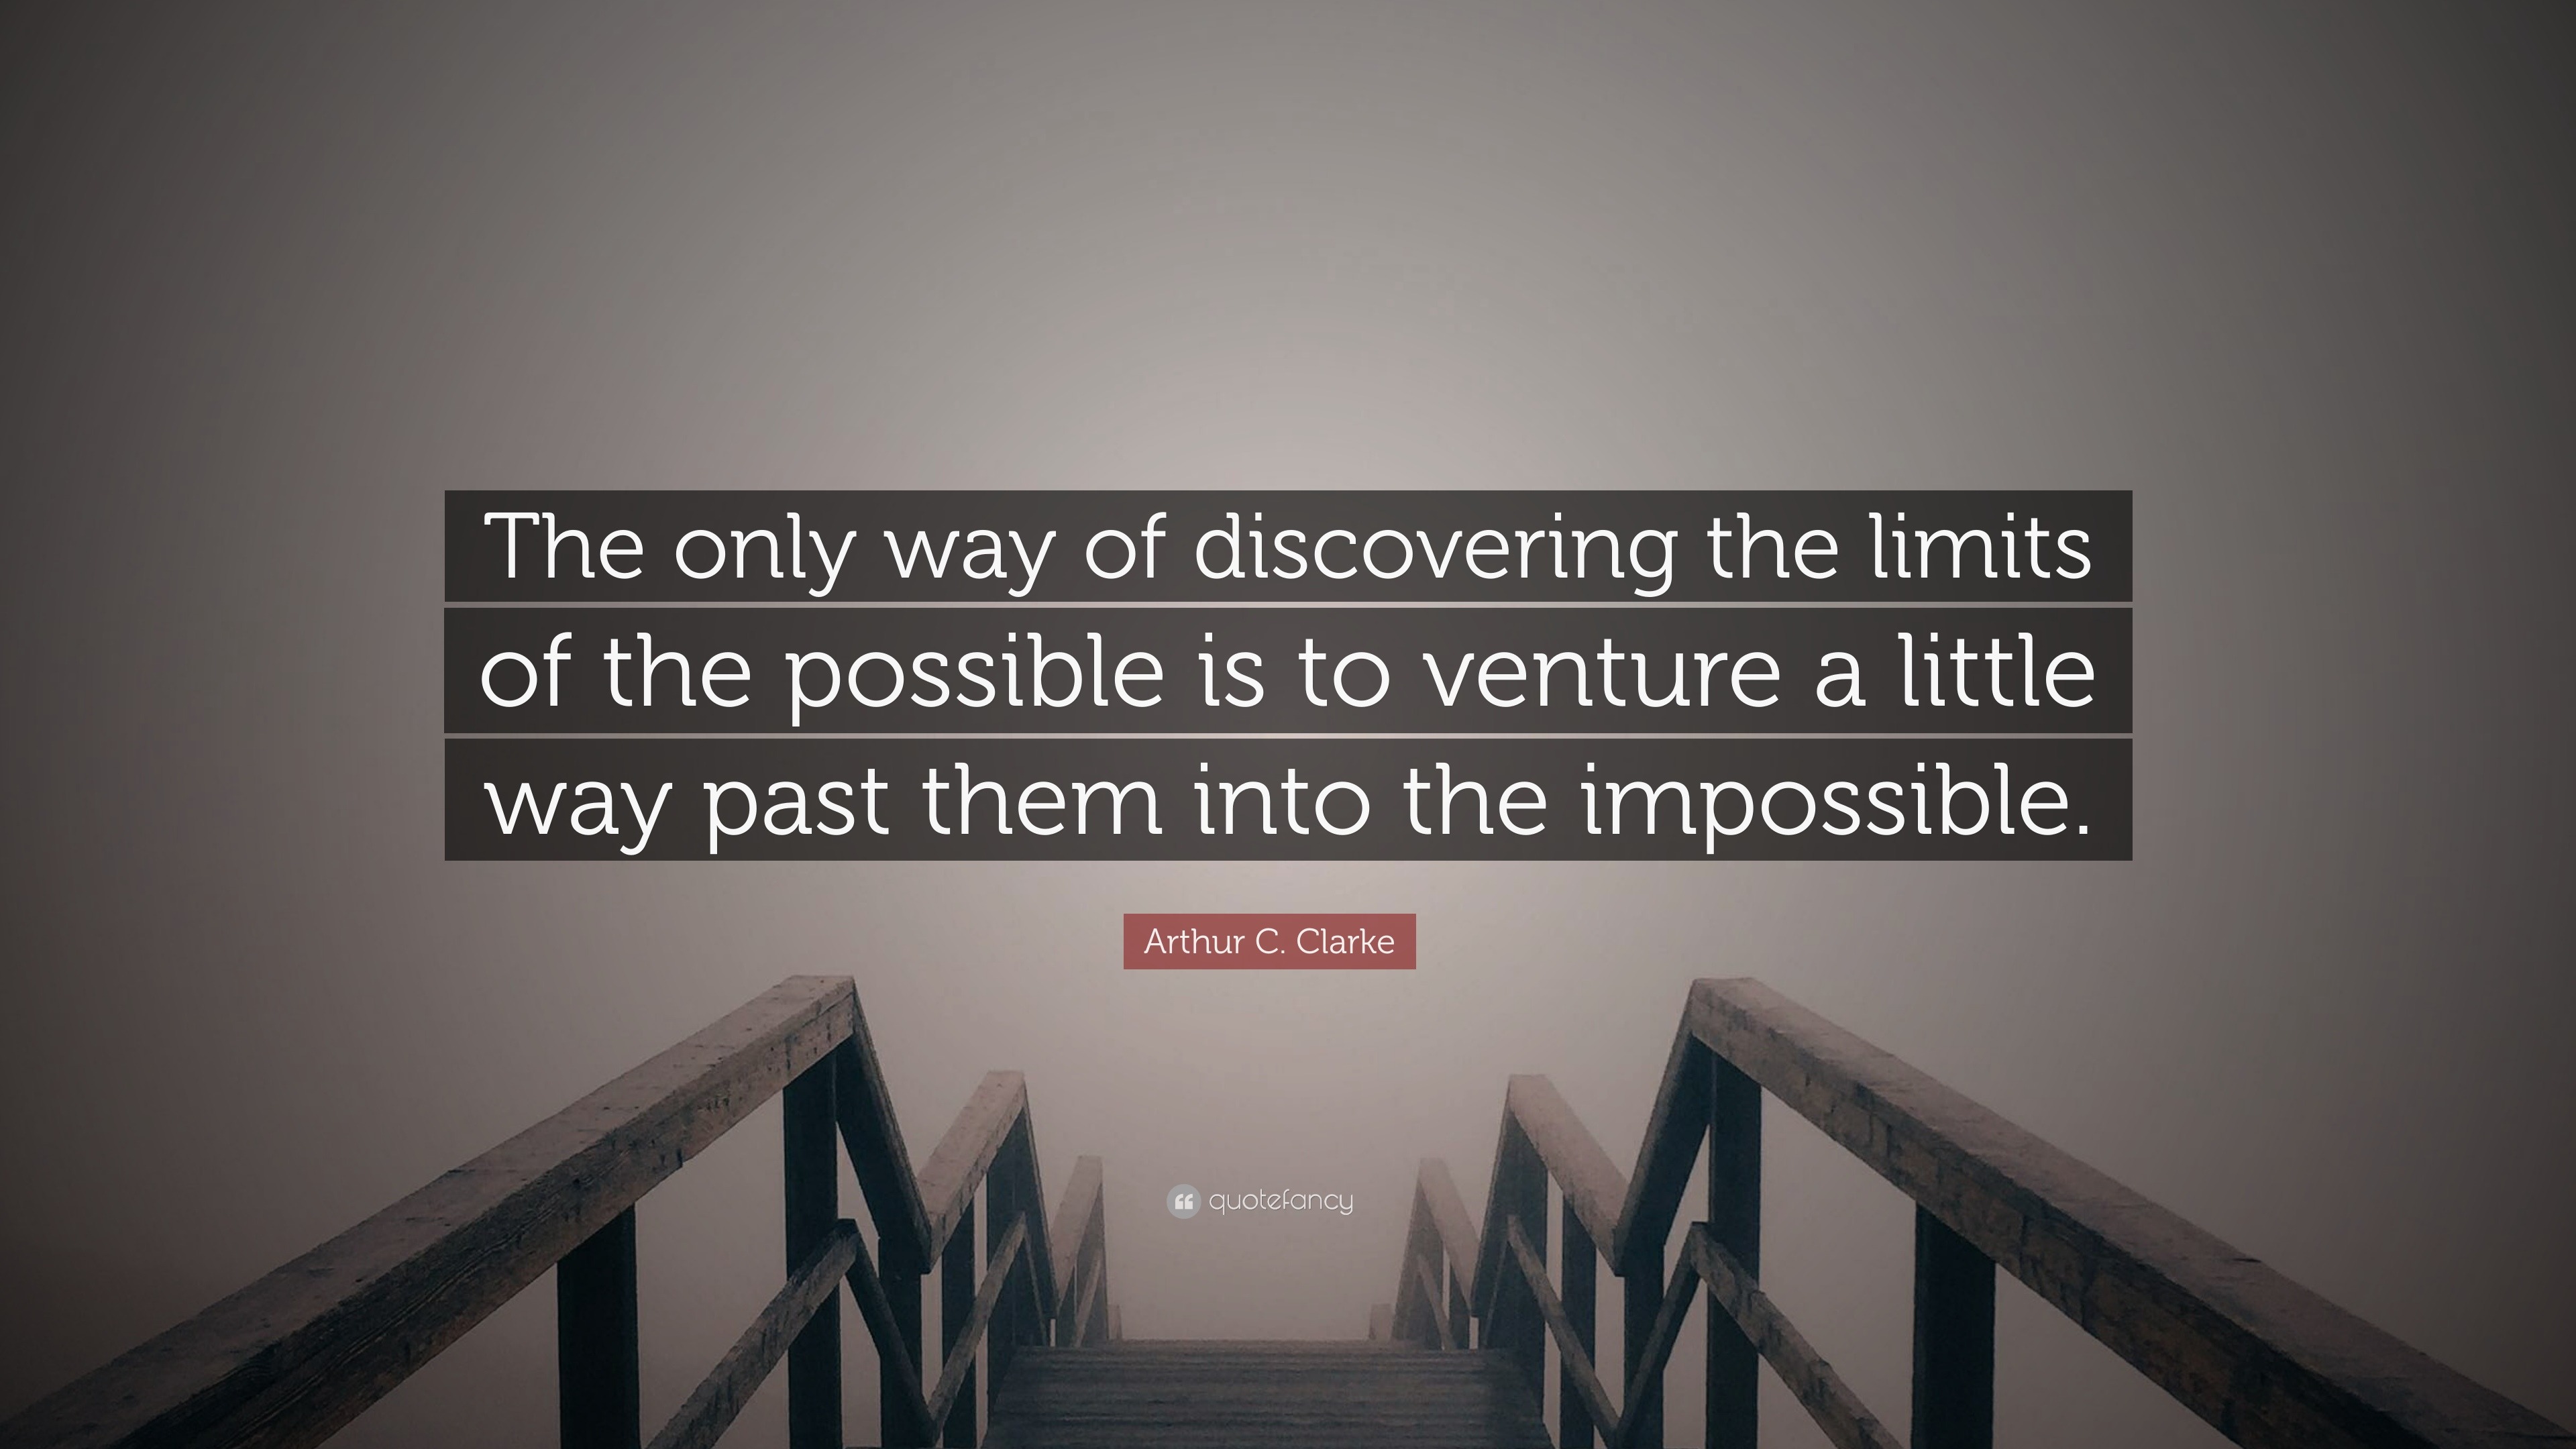 Arthur C. Clarke Quote: “The only way of discovering the limits of the ...